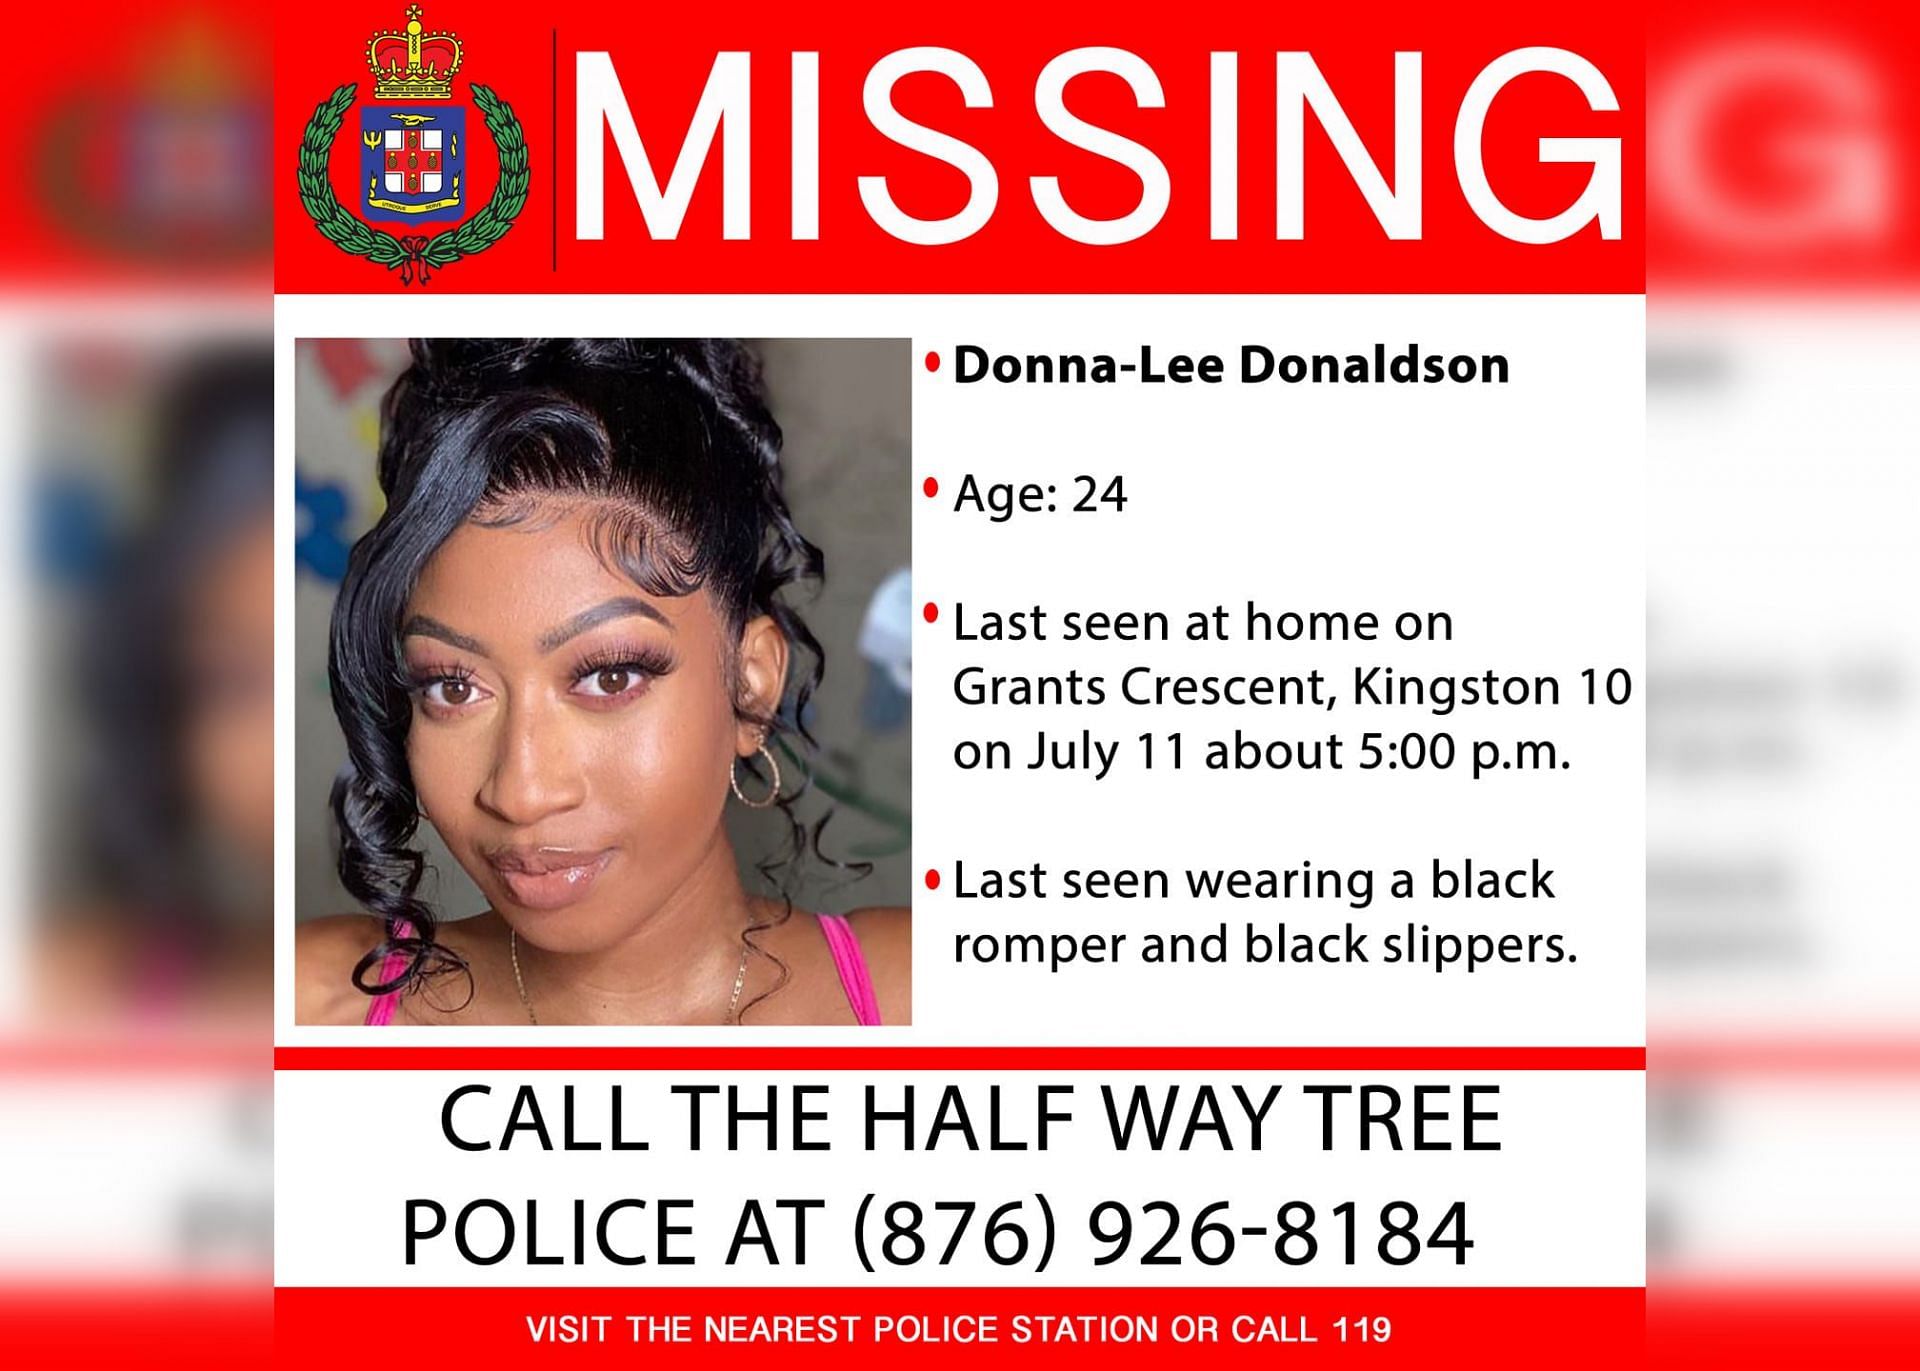 What happened to Donna-Lee Donaldson? Family appeals to public as former  '876 Roommates' host remains missing